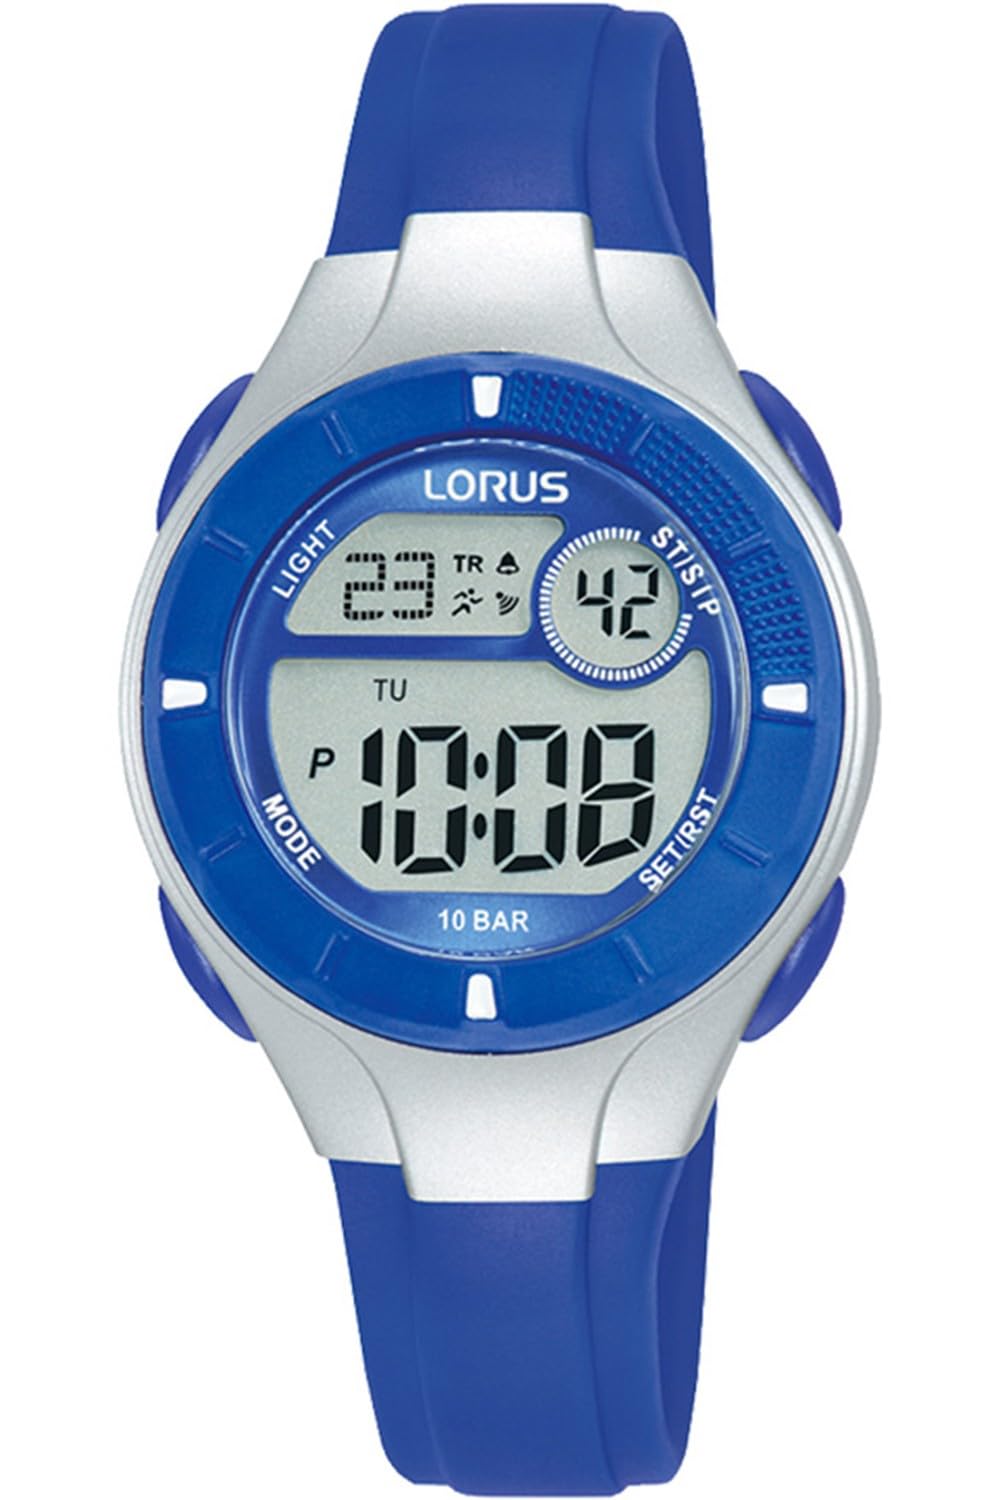 Lotus Unisex Adult Watches Mod. R2341Px9